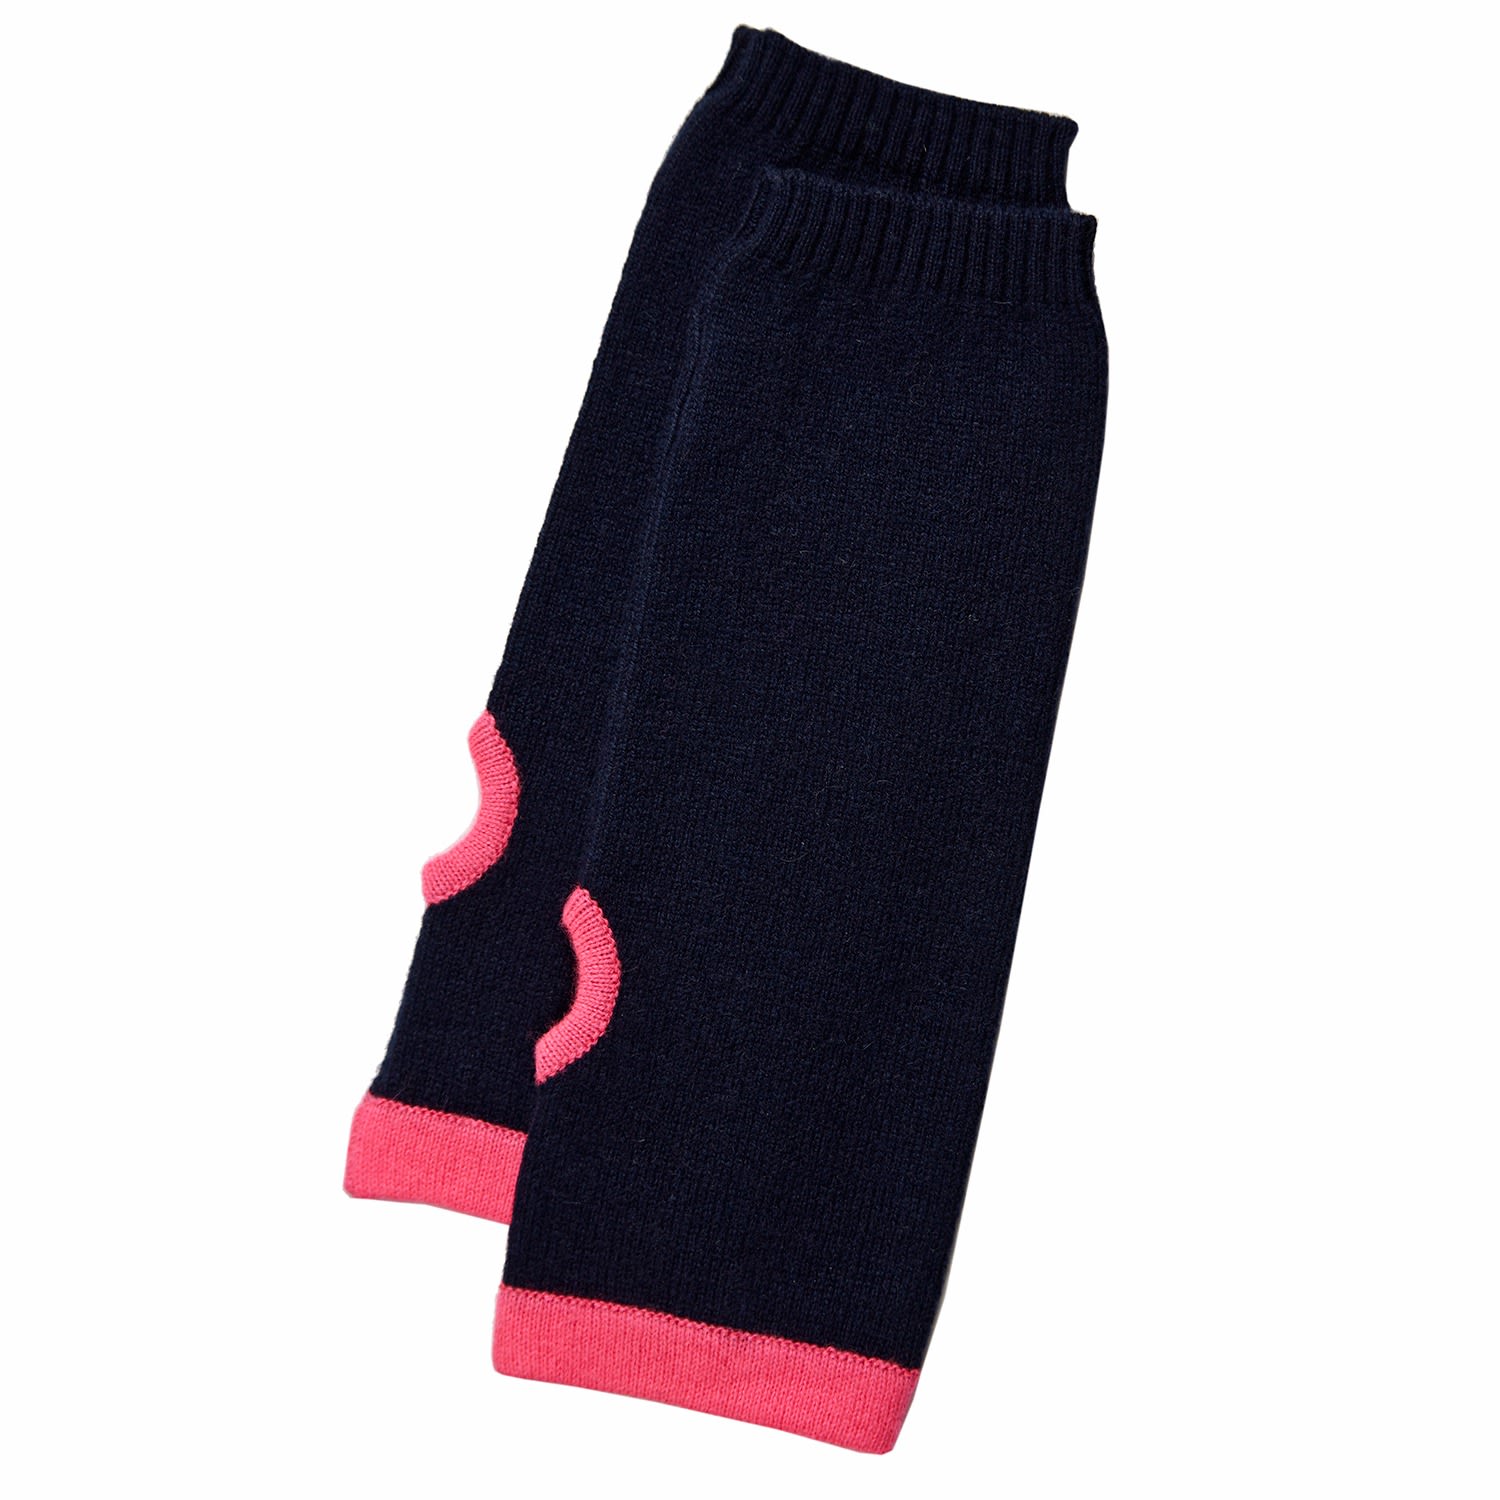 Cove Women's Blue Cashmere Wrist Warmers Navy & Neon Pink In Black